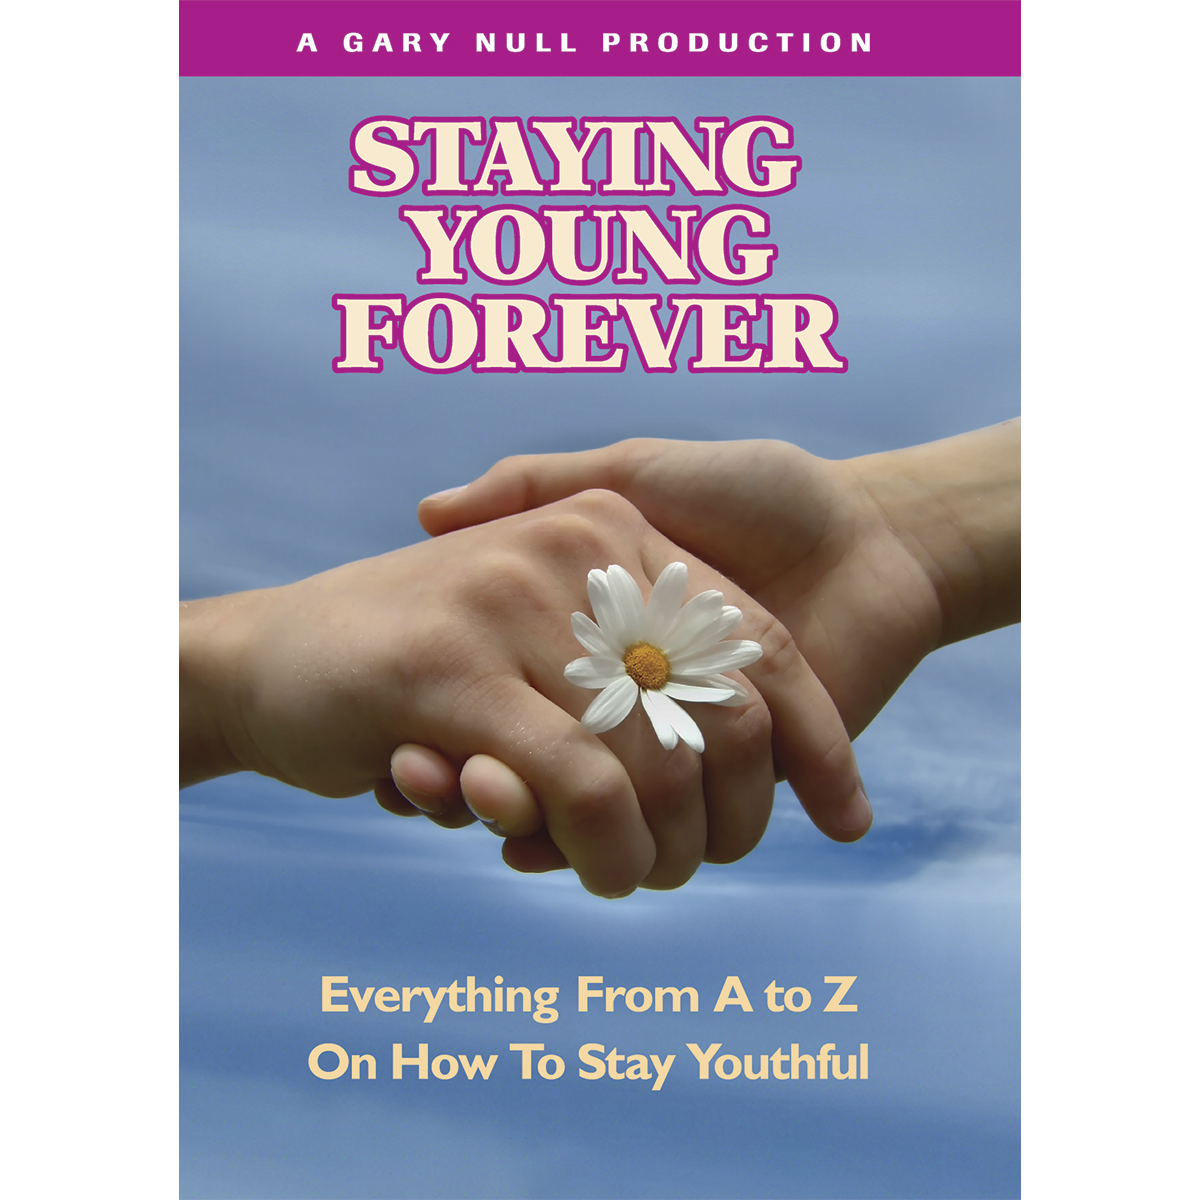 Staying-Young-Forever_1c4ba570-e138-4910-a721-699ec53ae087.png